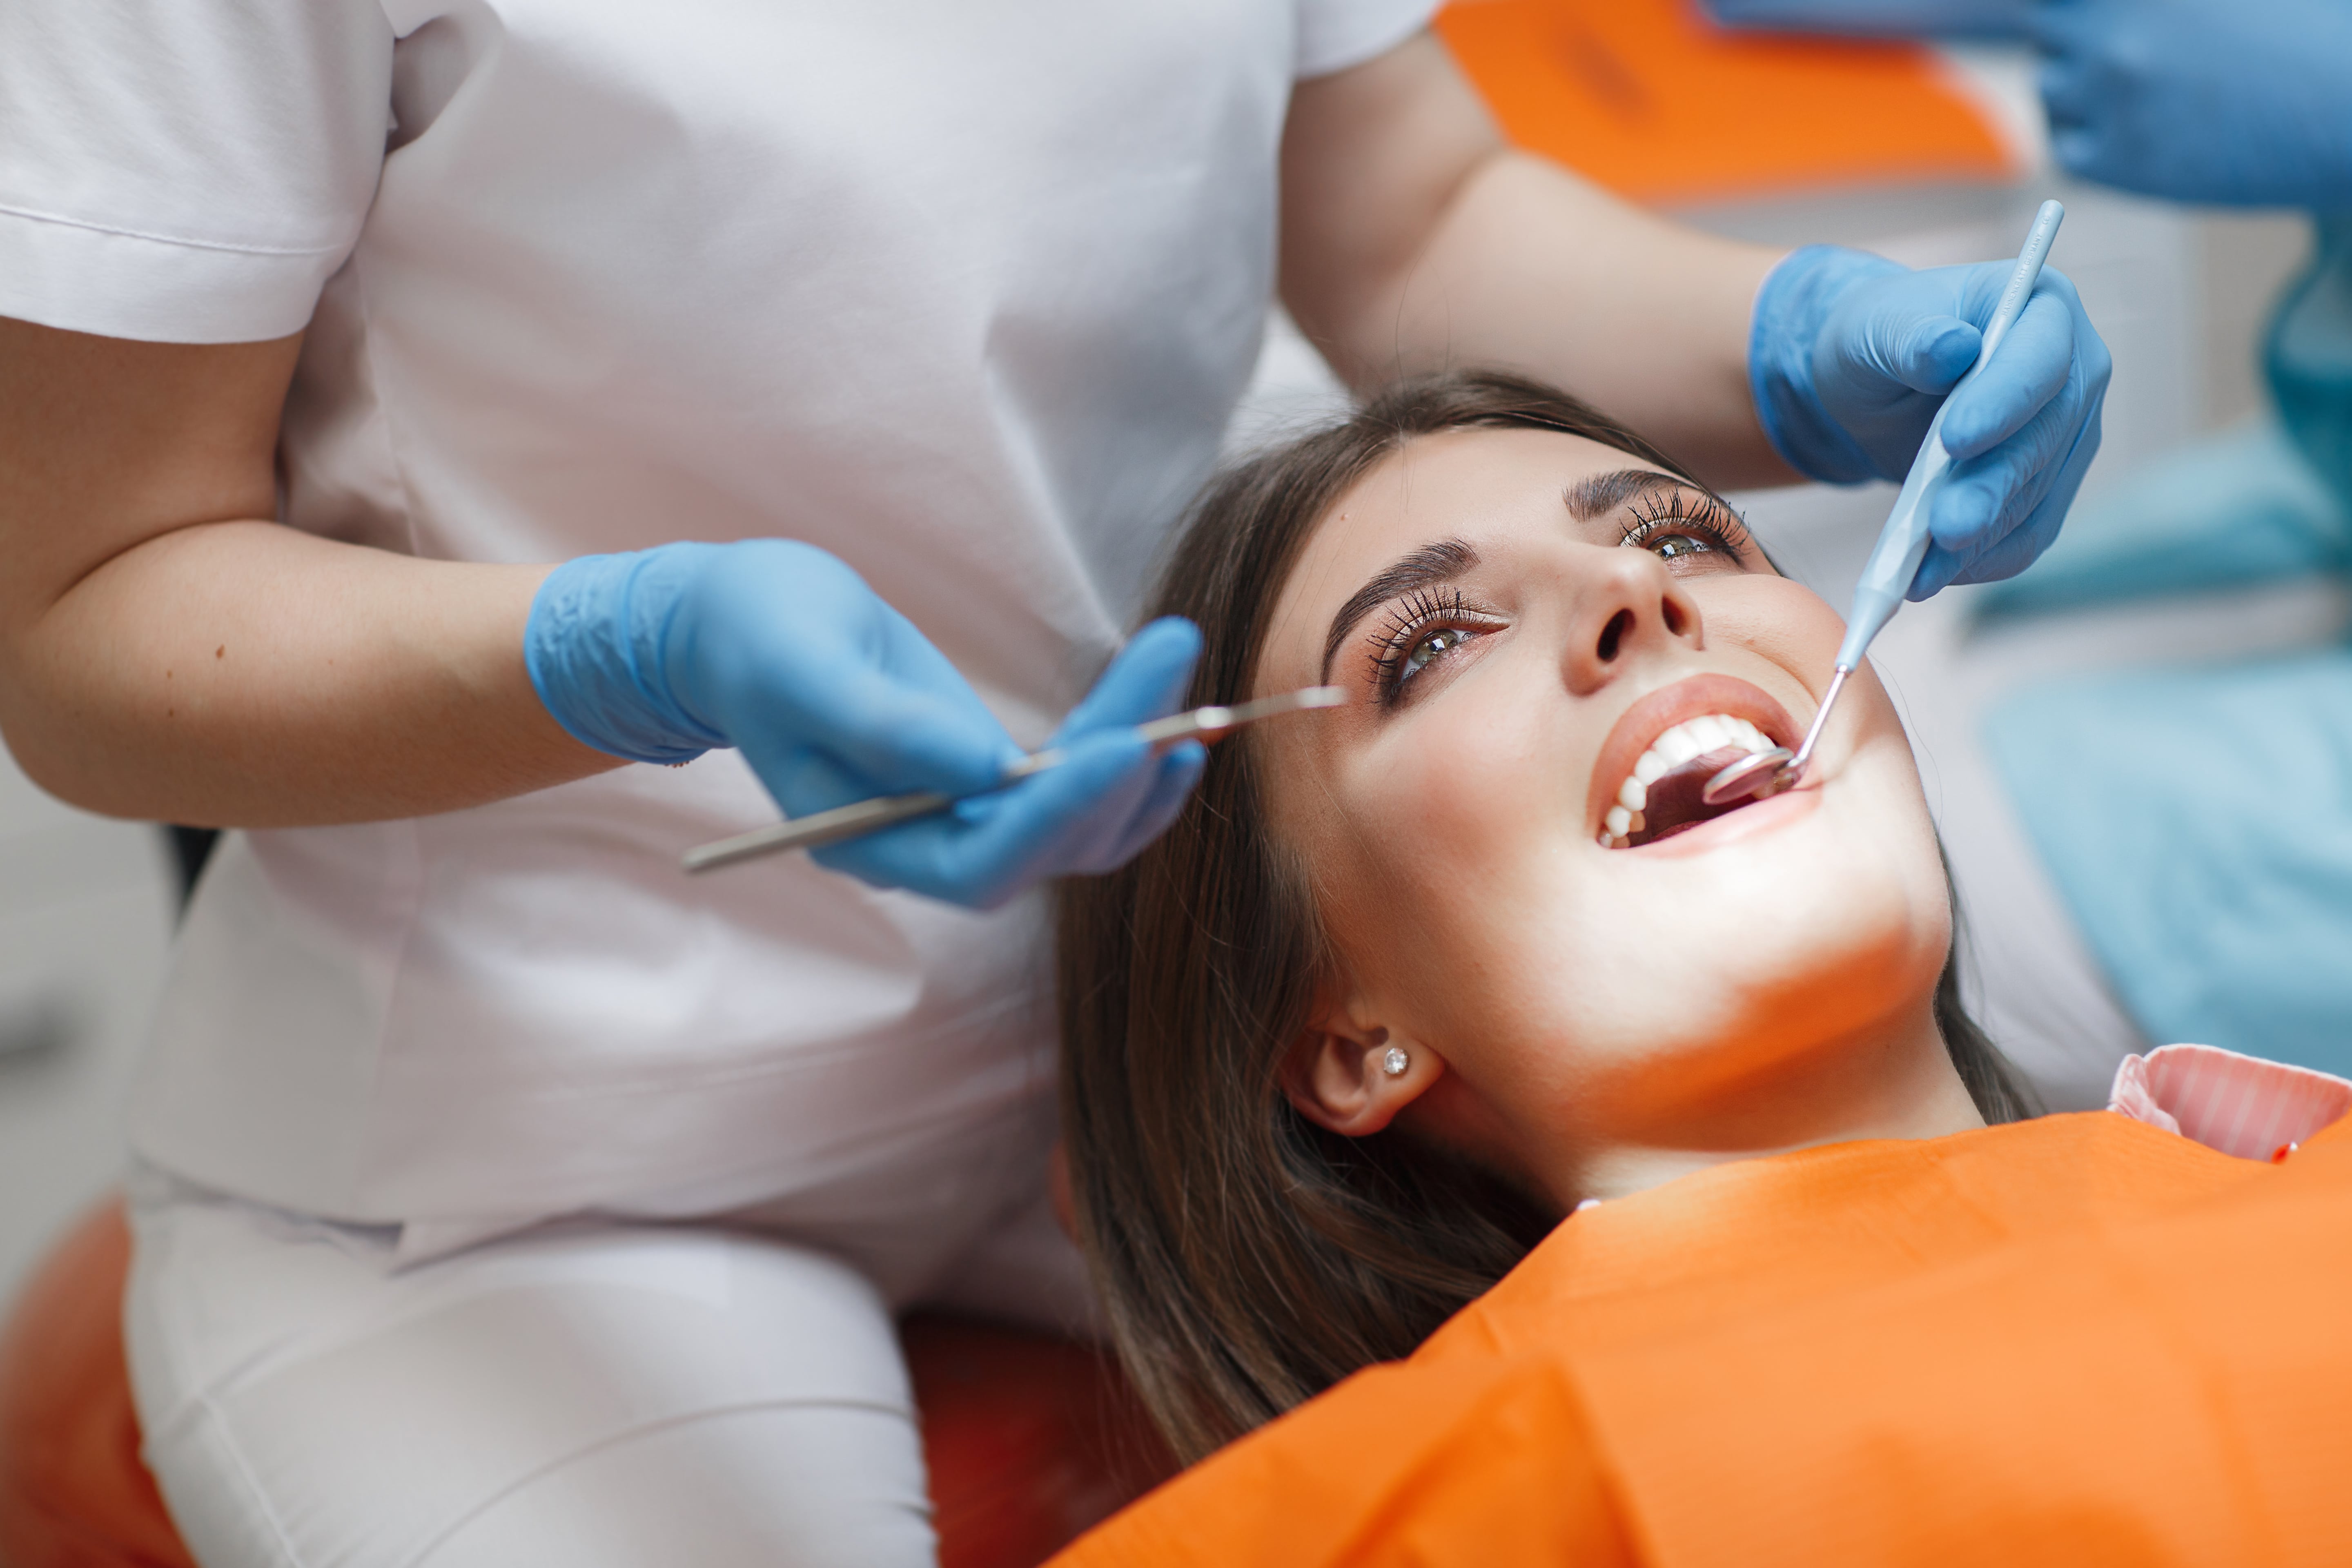 Cosmetic Dentistry Melbourne: What is the Reason To Go For Teeth Straightening Treatment?